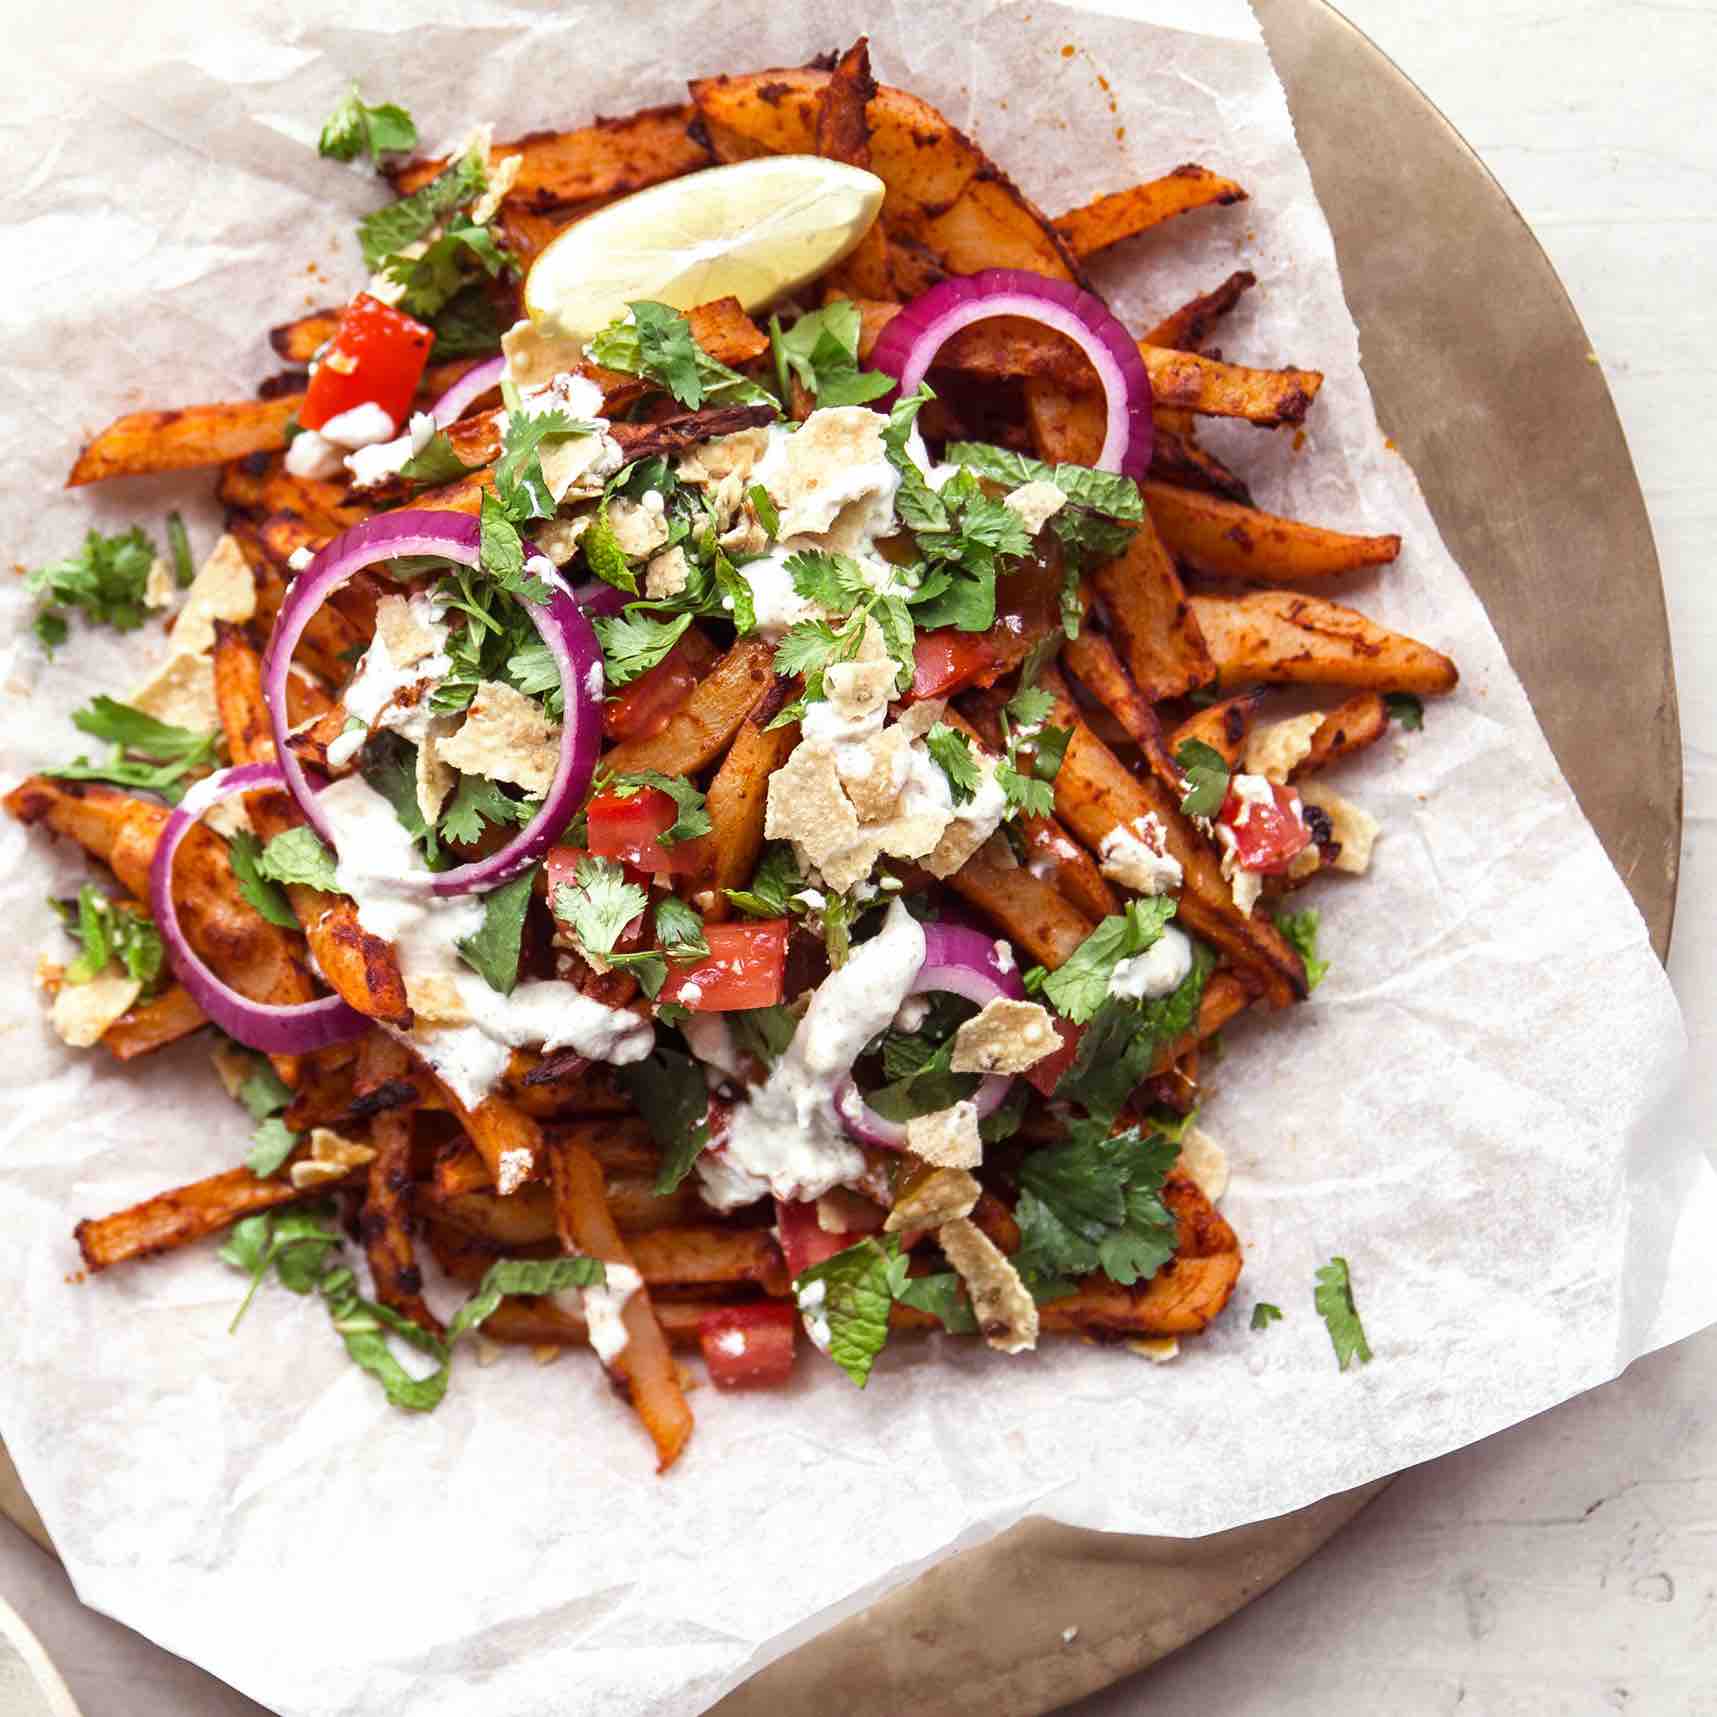 Tandoori Loaded Fries - So crunchy and delicious